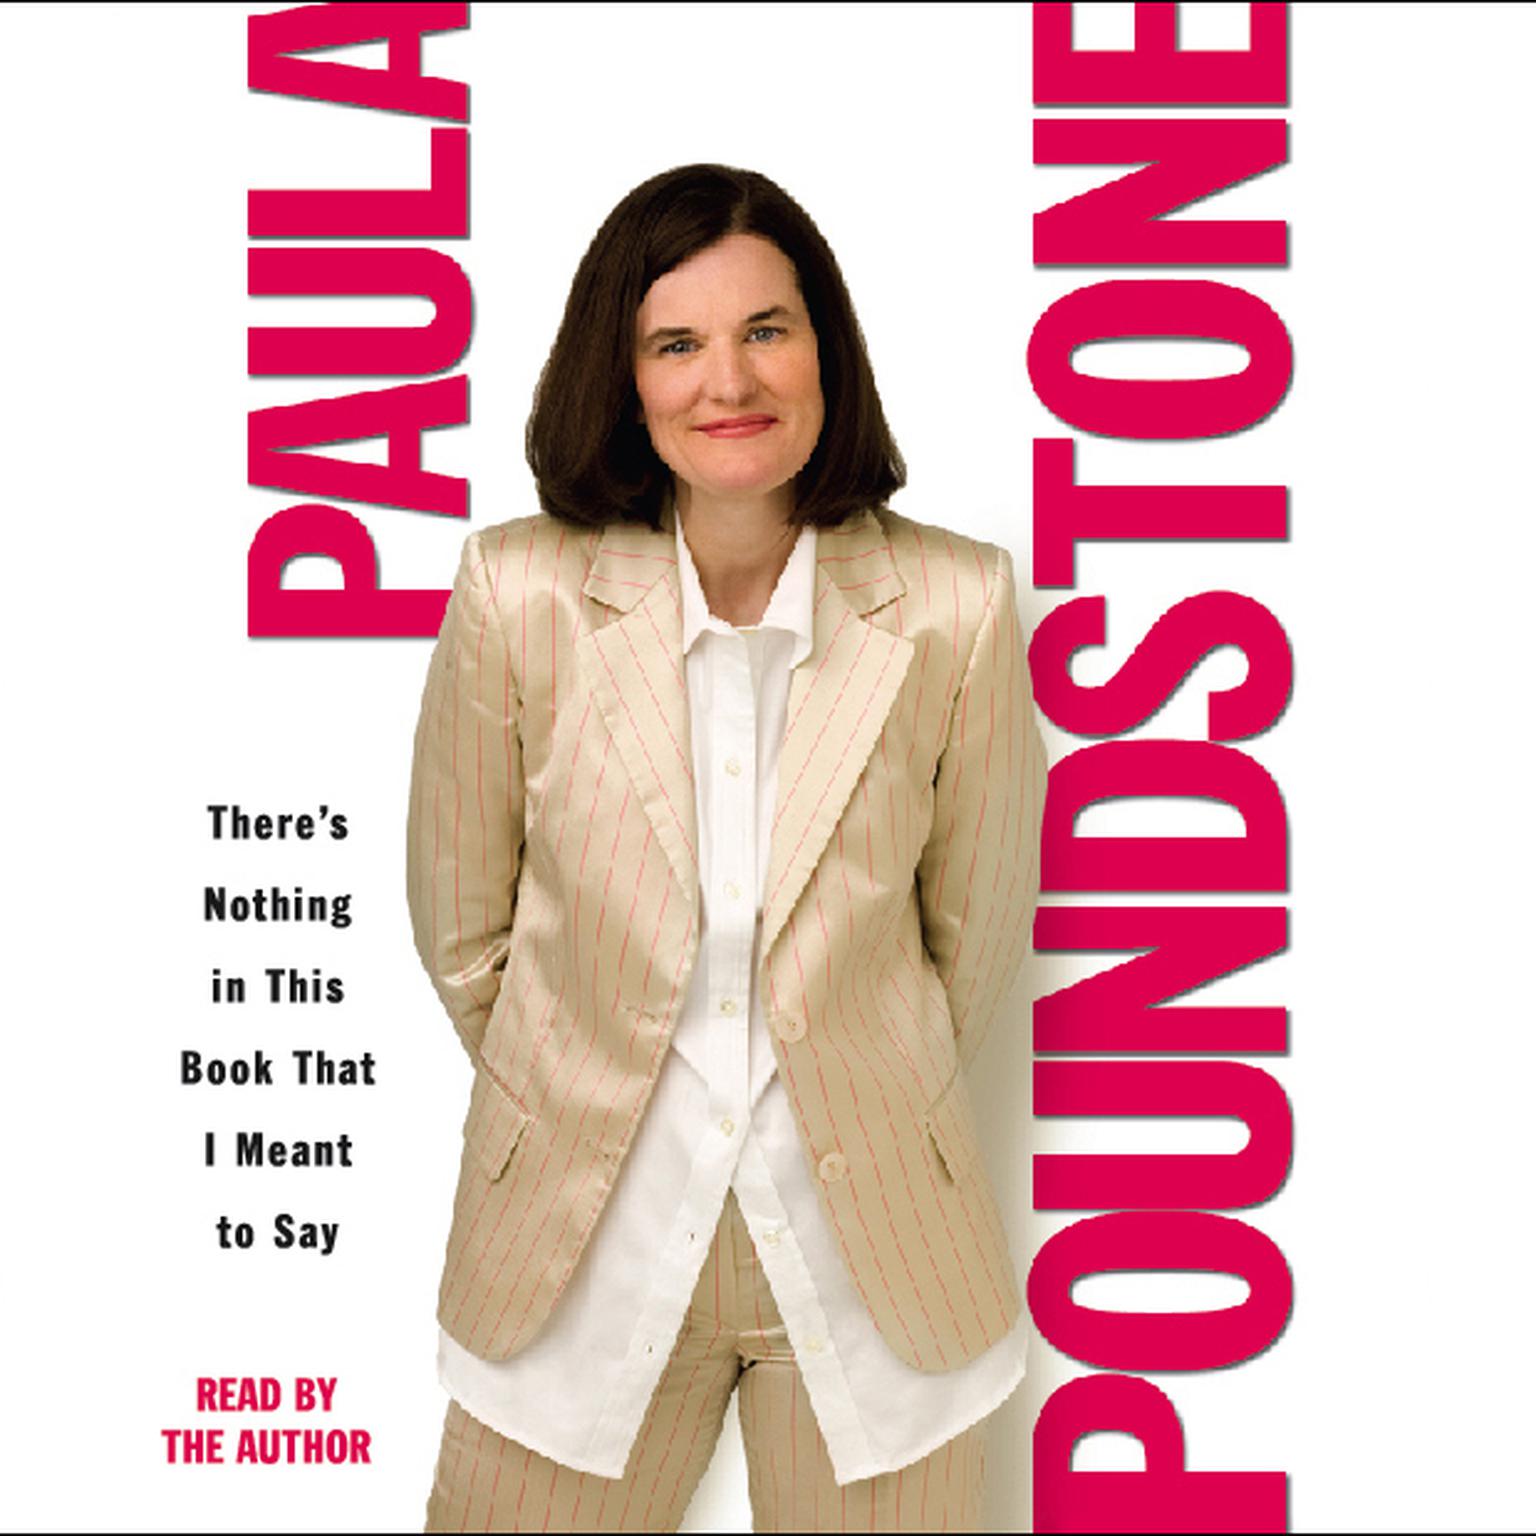 Theres Nothing in This Book That I Meant to Say (Abridged) Audiobook, by Paula Poundstone